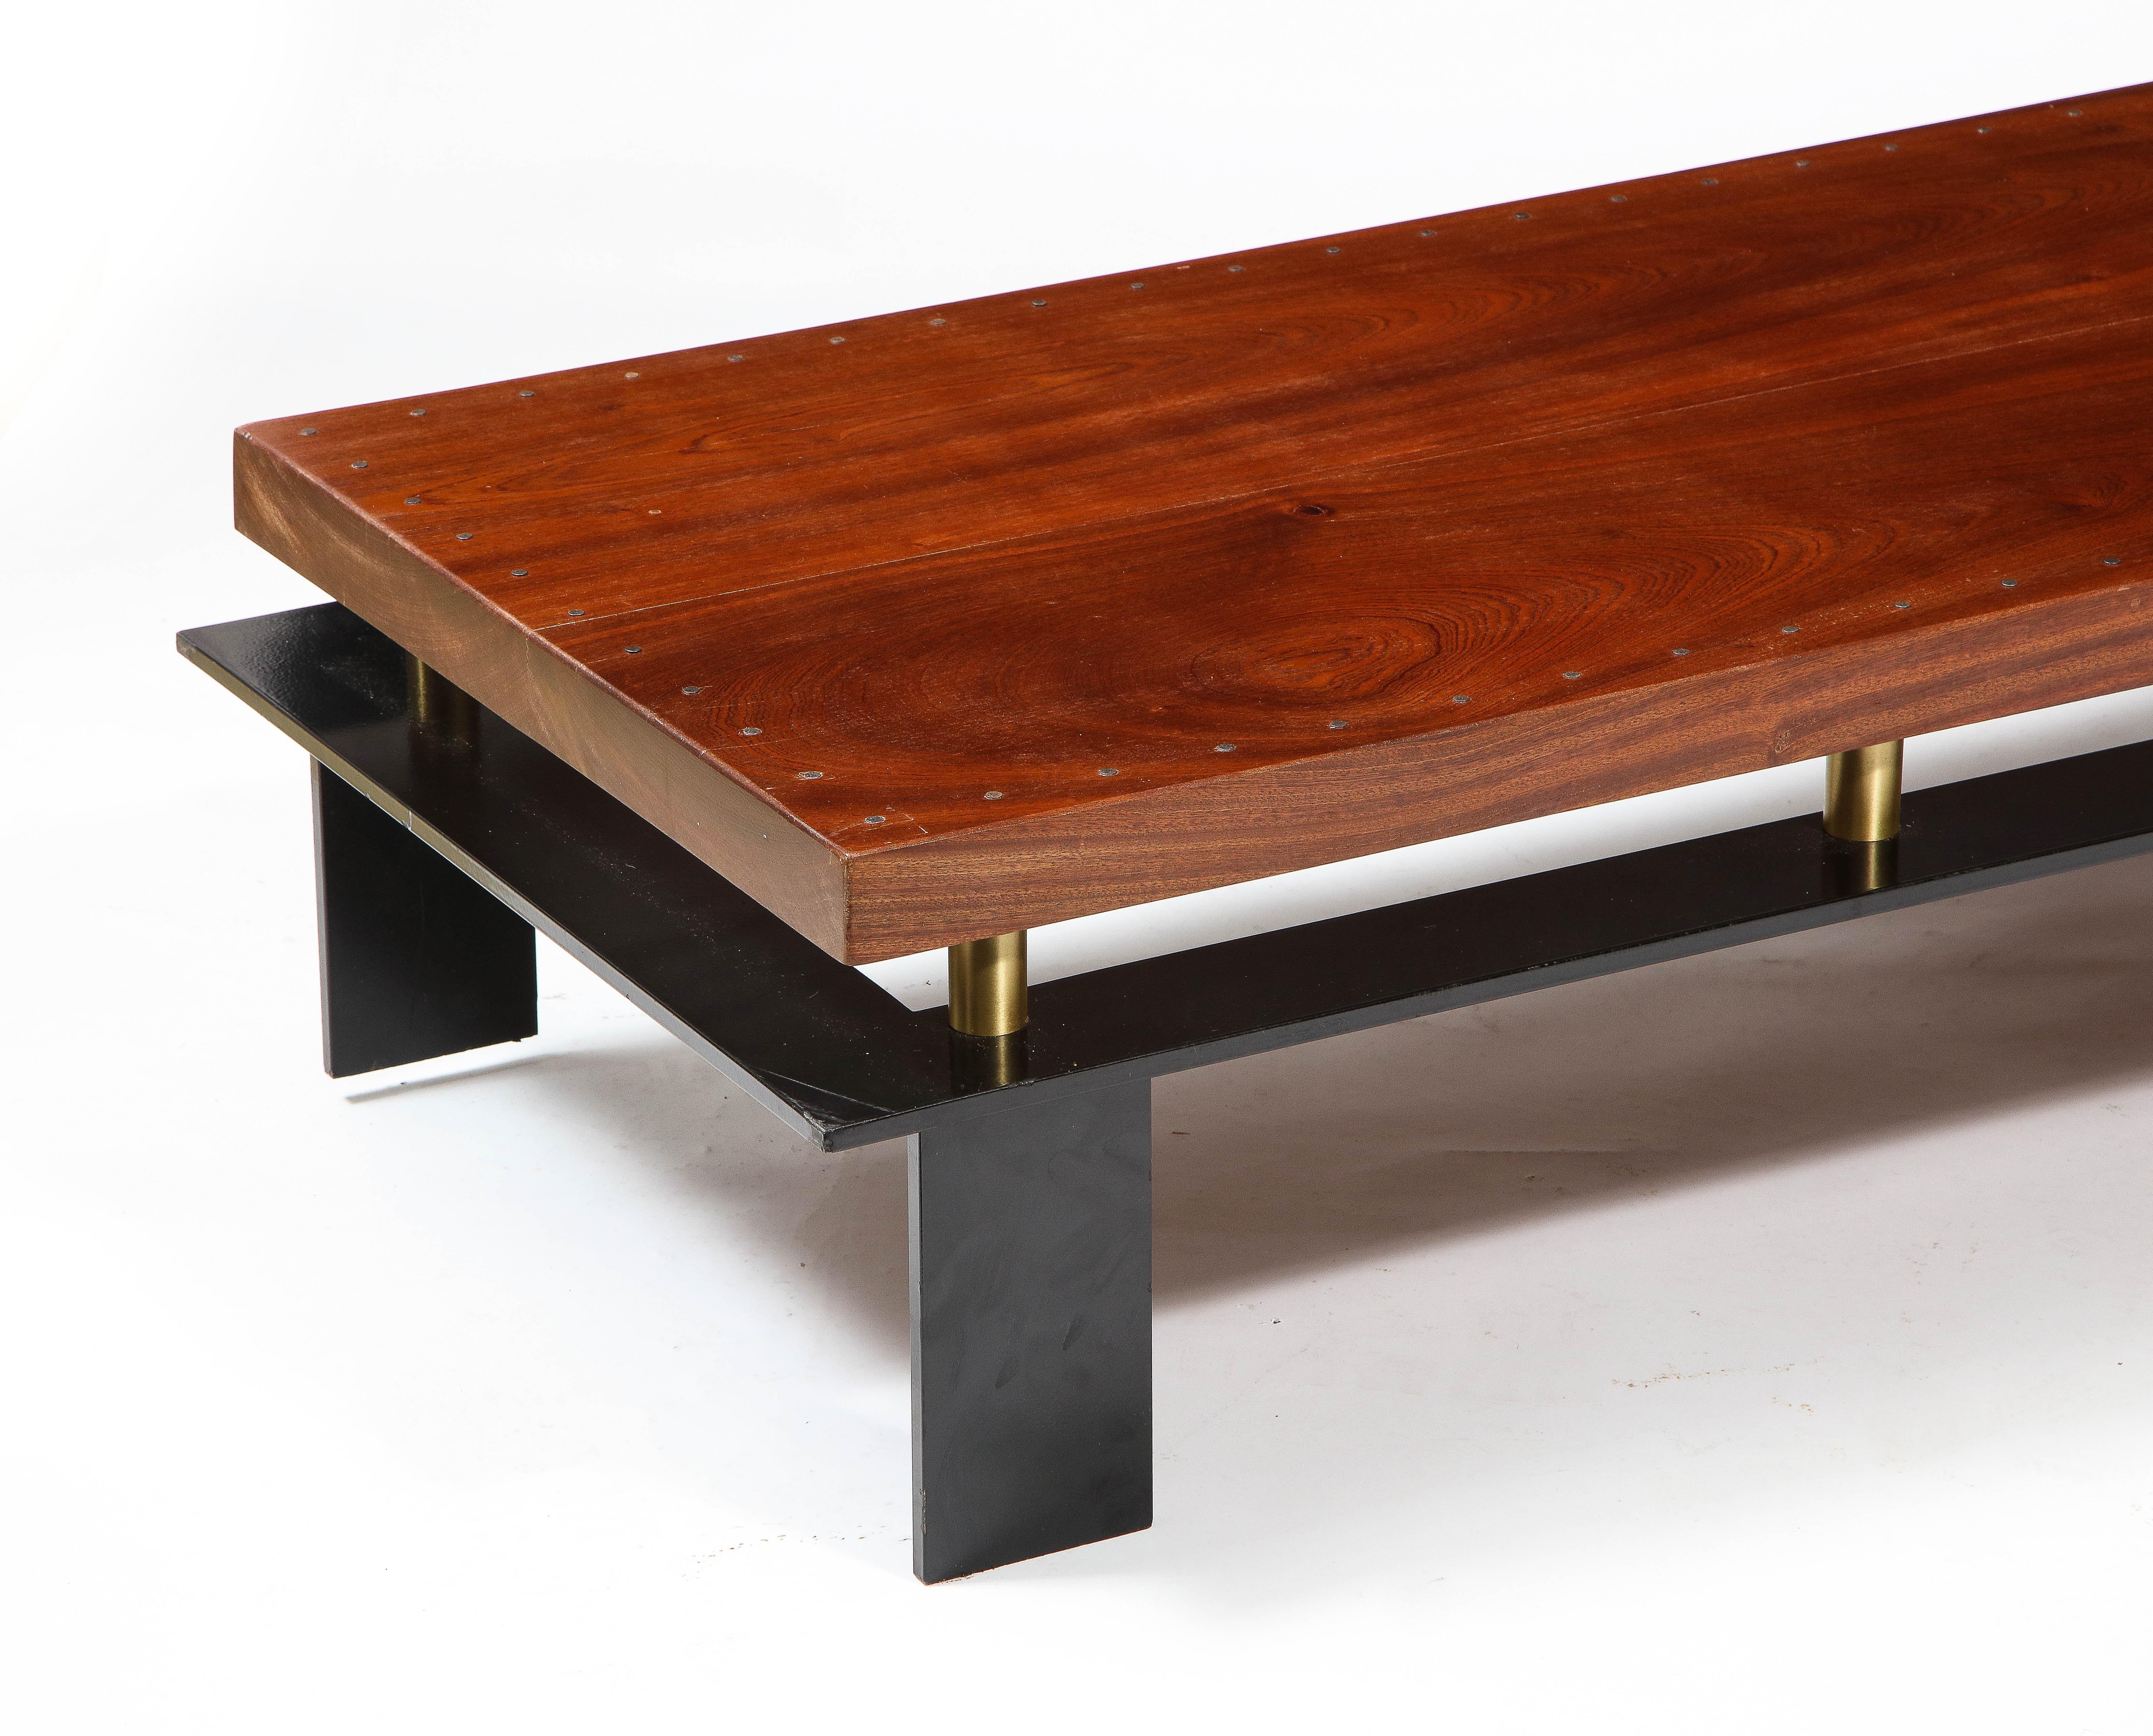 20th Century Large Long Low Modernist Steel & Walnut Coffee Table, France 1970's For Sale